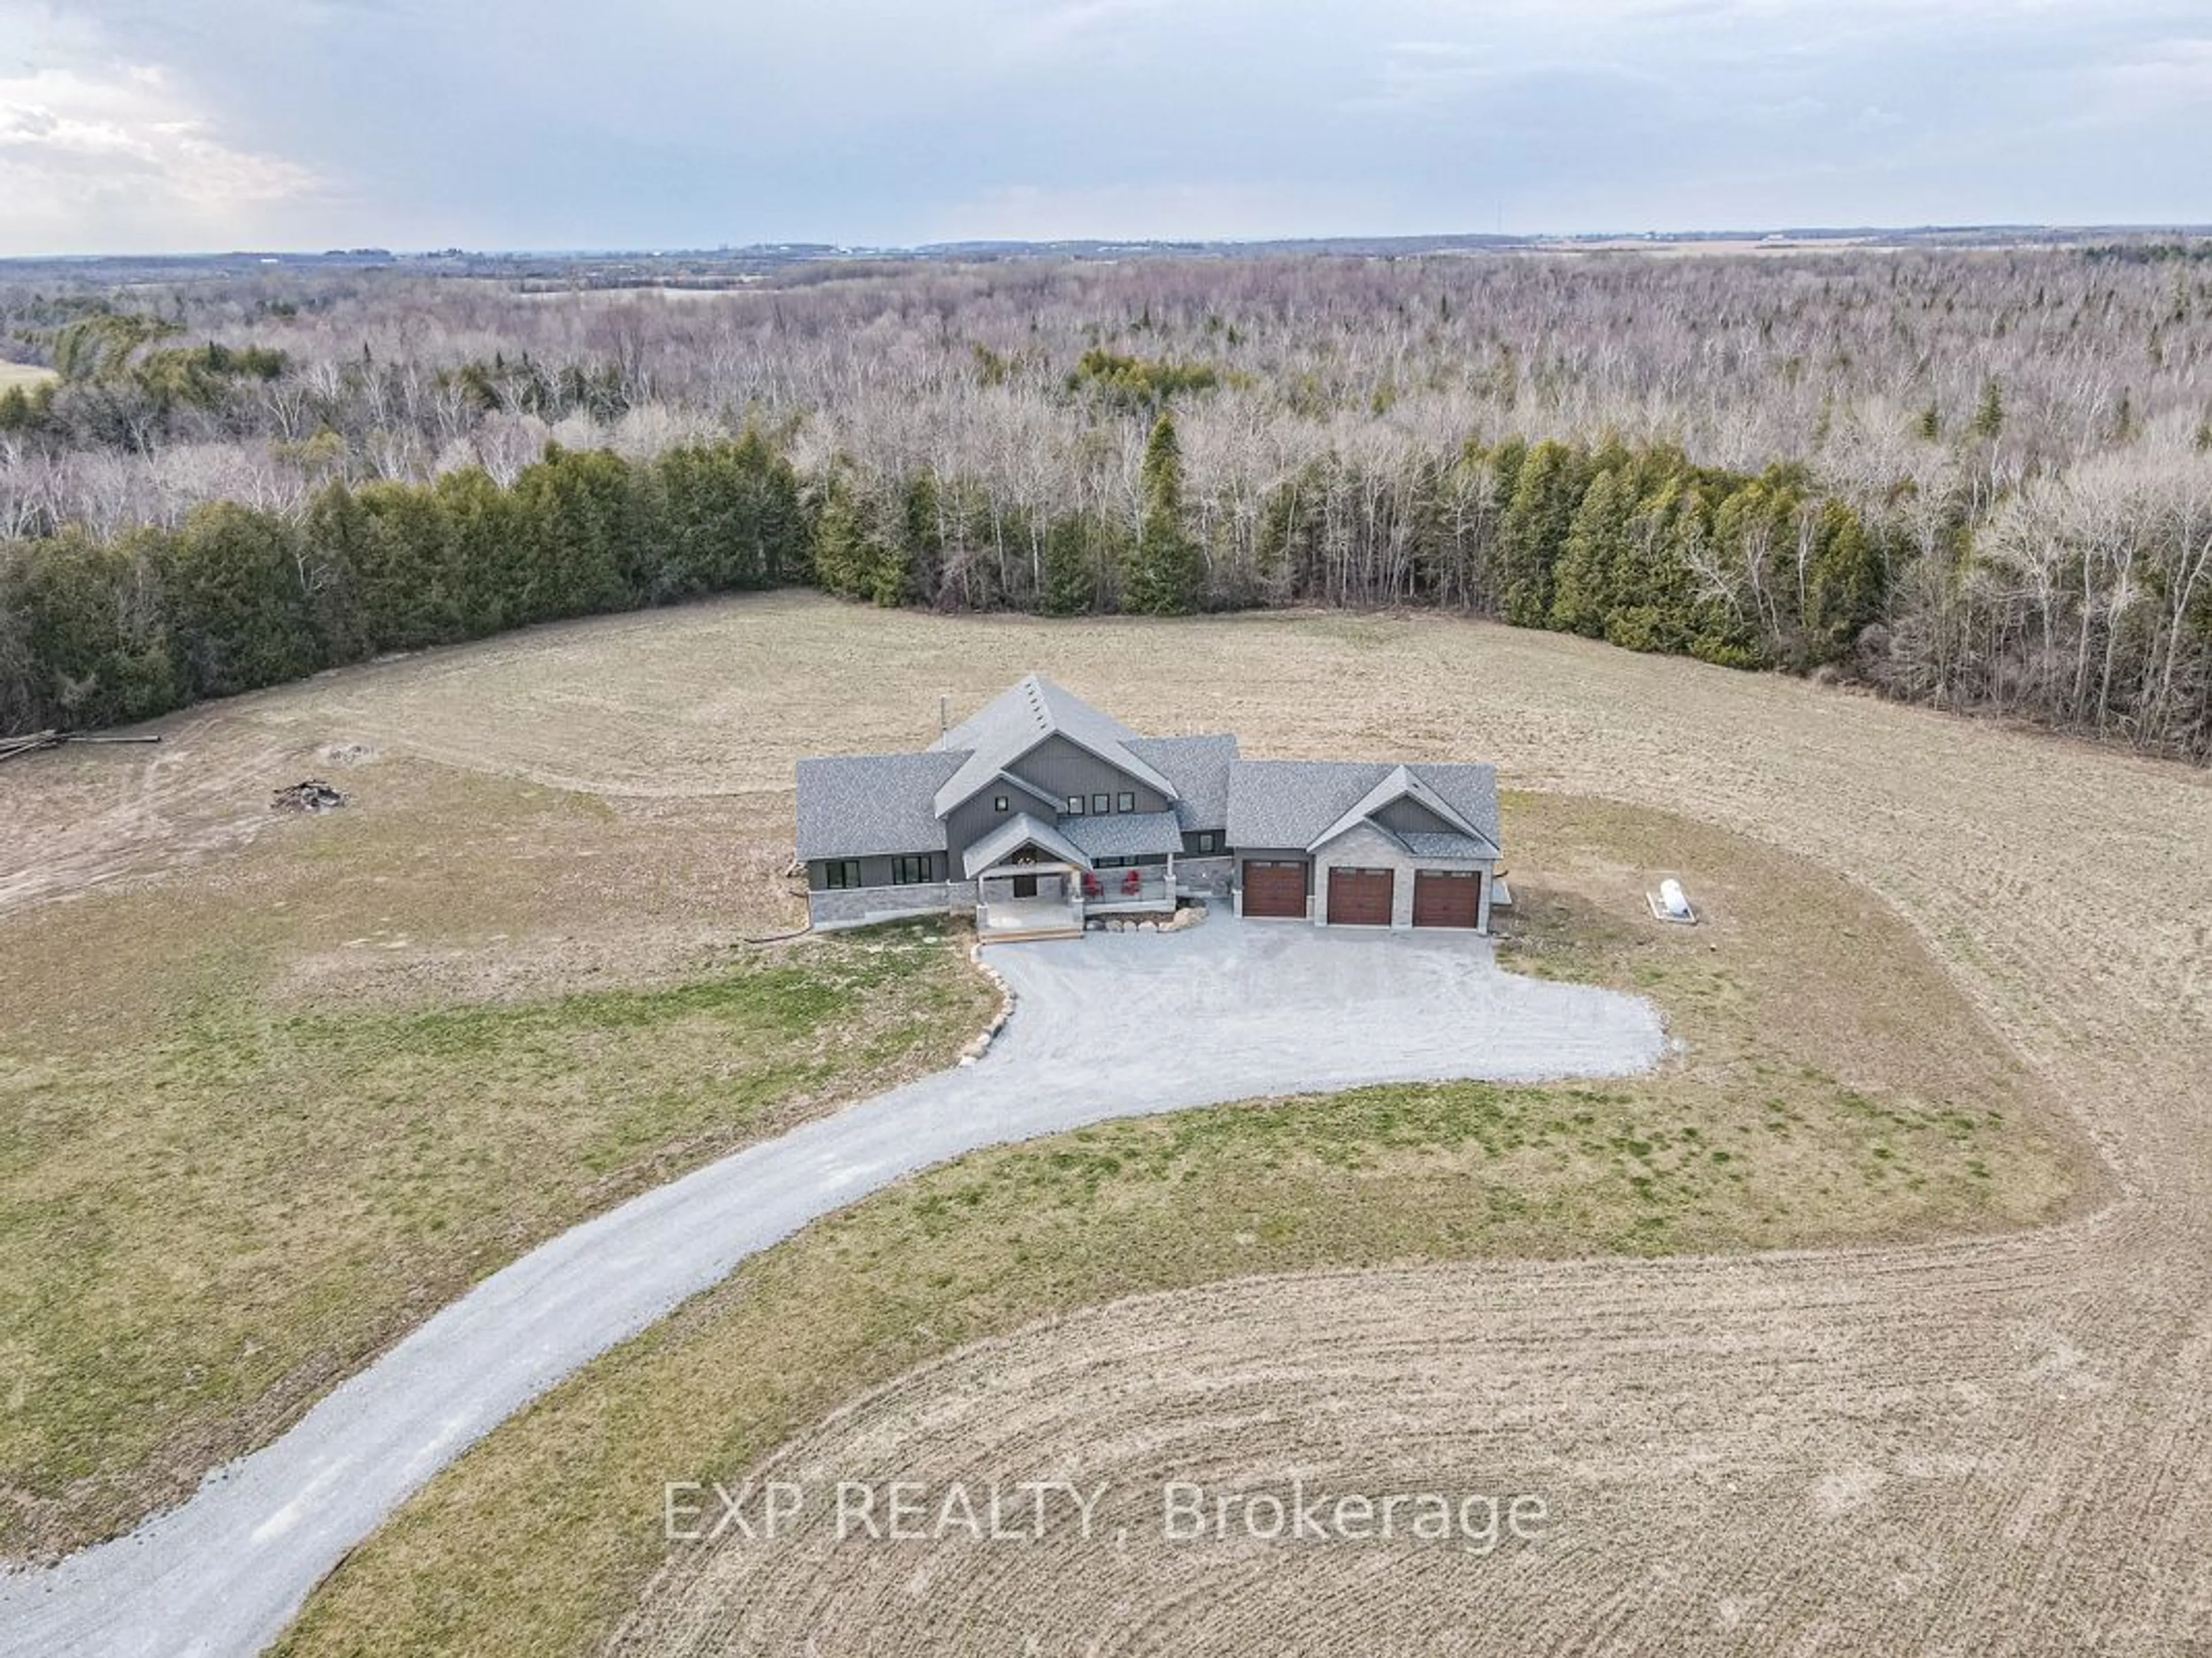 Frontside or backside of a home for 1023 Concession Road 8 Rd, Brock Ontario L0C 1H0